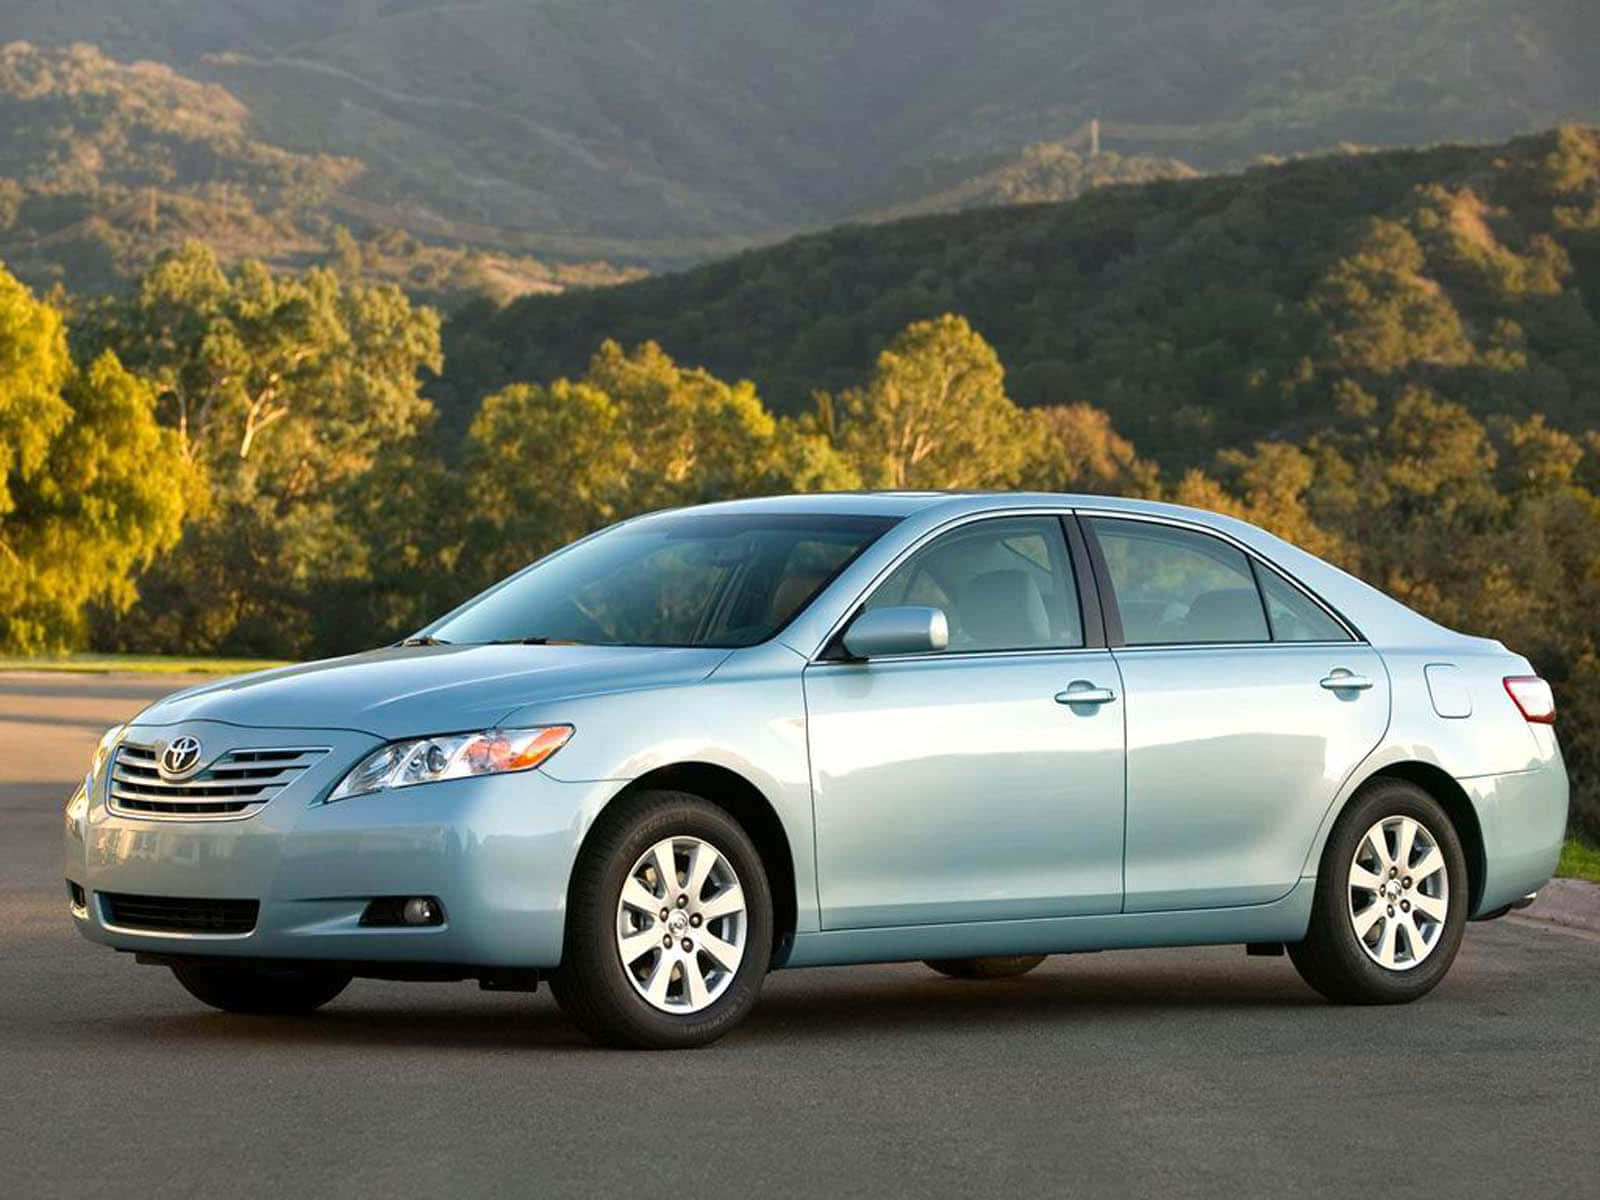 Sleek Silver Toyota Camry On Scenic Road Trip Wallpaper